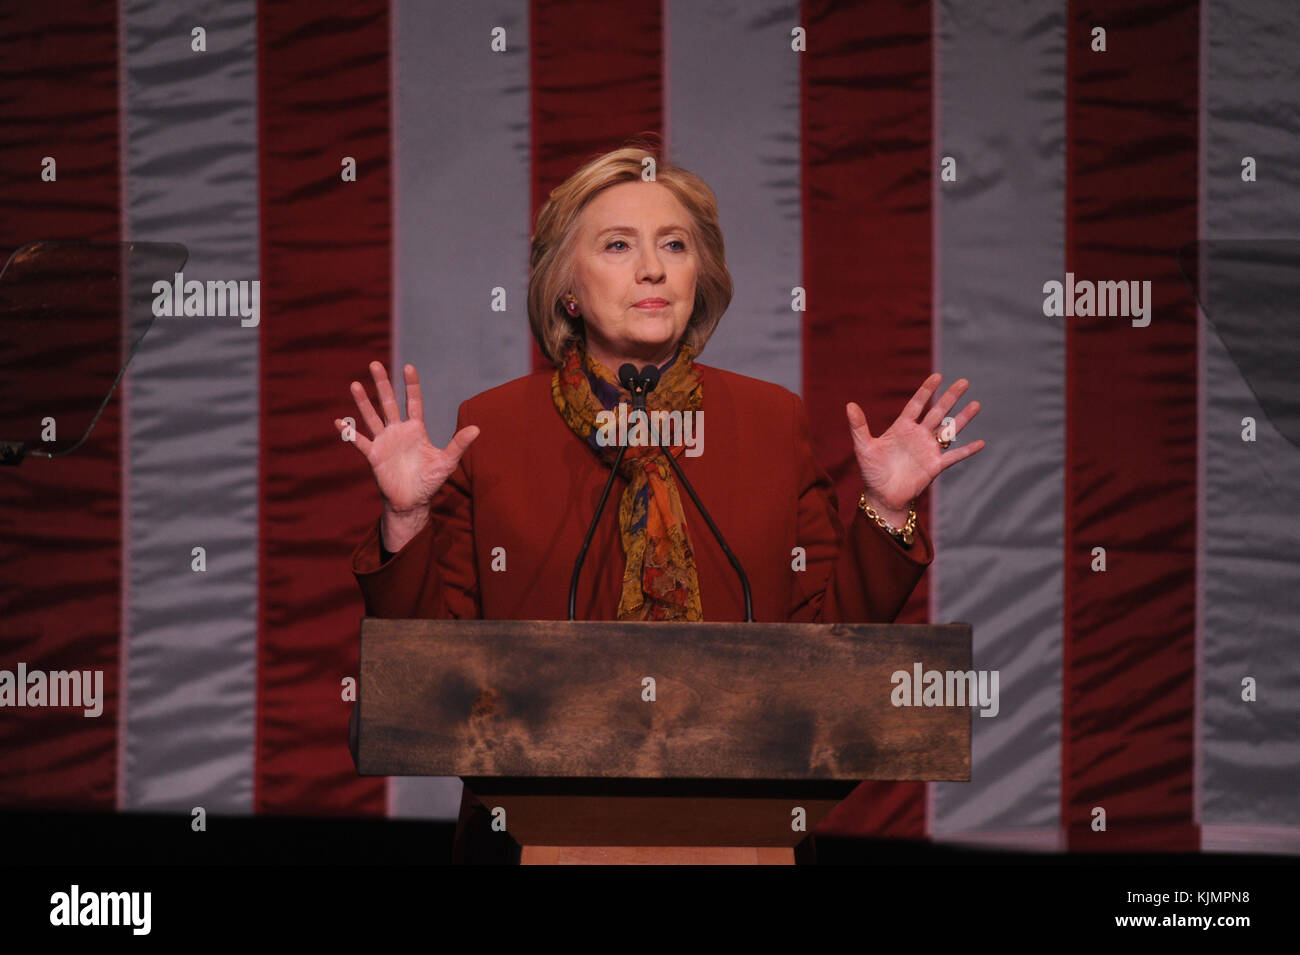 NEW YORK, NY - FEBRUARY 16: Democratic presidential candidate and former U.S. Secretary of State Hillary Clinton (R) listens as Rep. Charlie Rangel (D-NY13) introduces her at the Schomburg Center for Research in Black Culture on February 16, 2016 in New York City. Clinton is hoping to win the upcoming South Carolina and Nevada primaries  People:  Hillary Clinton Stock Photo